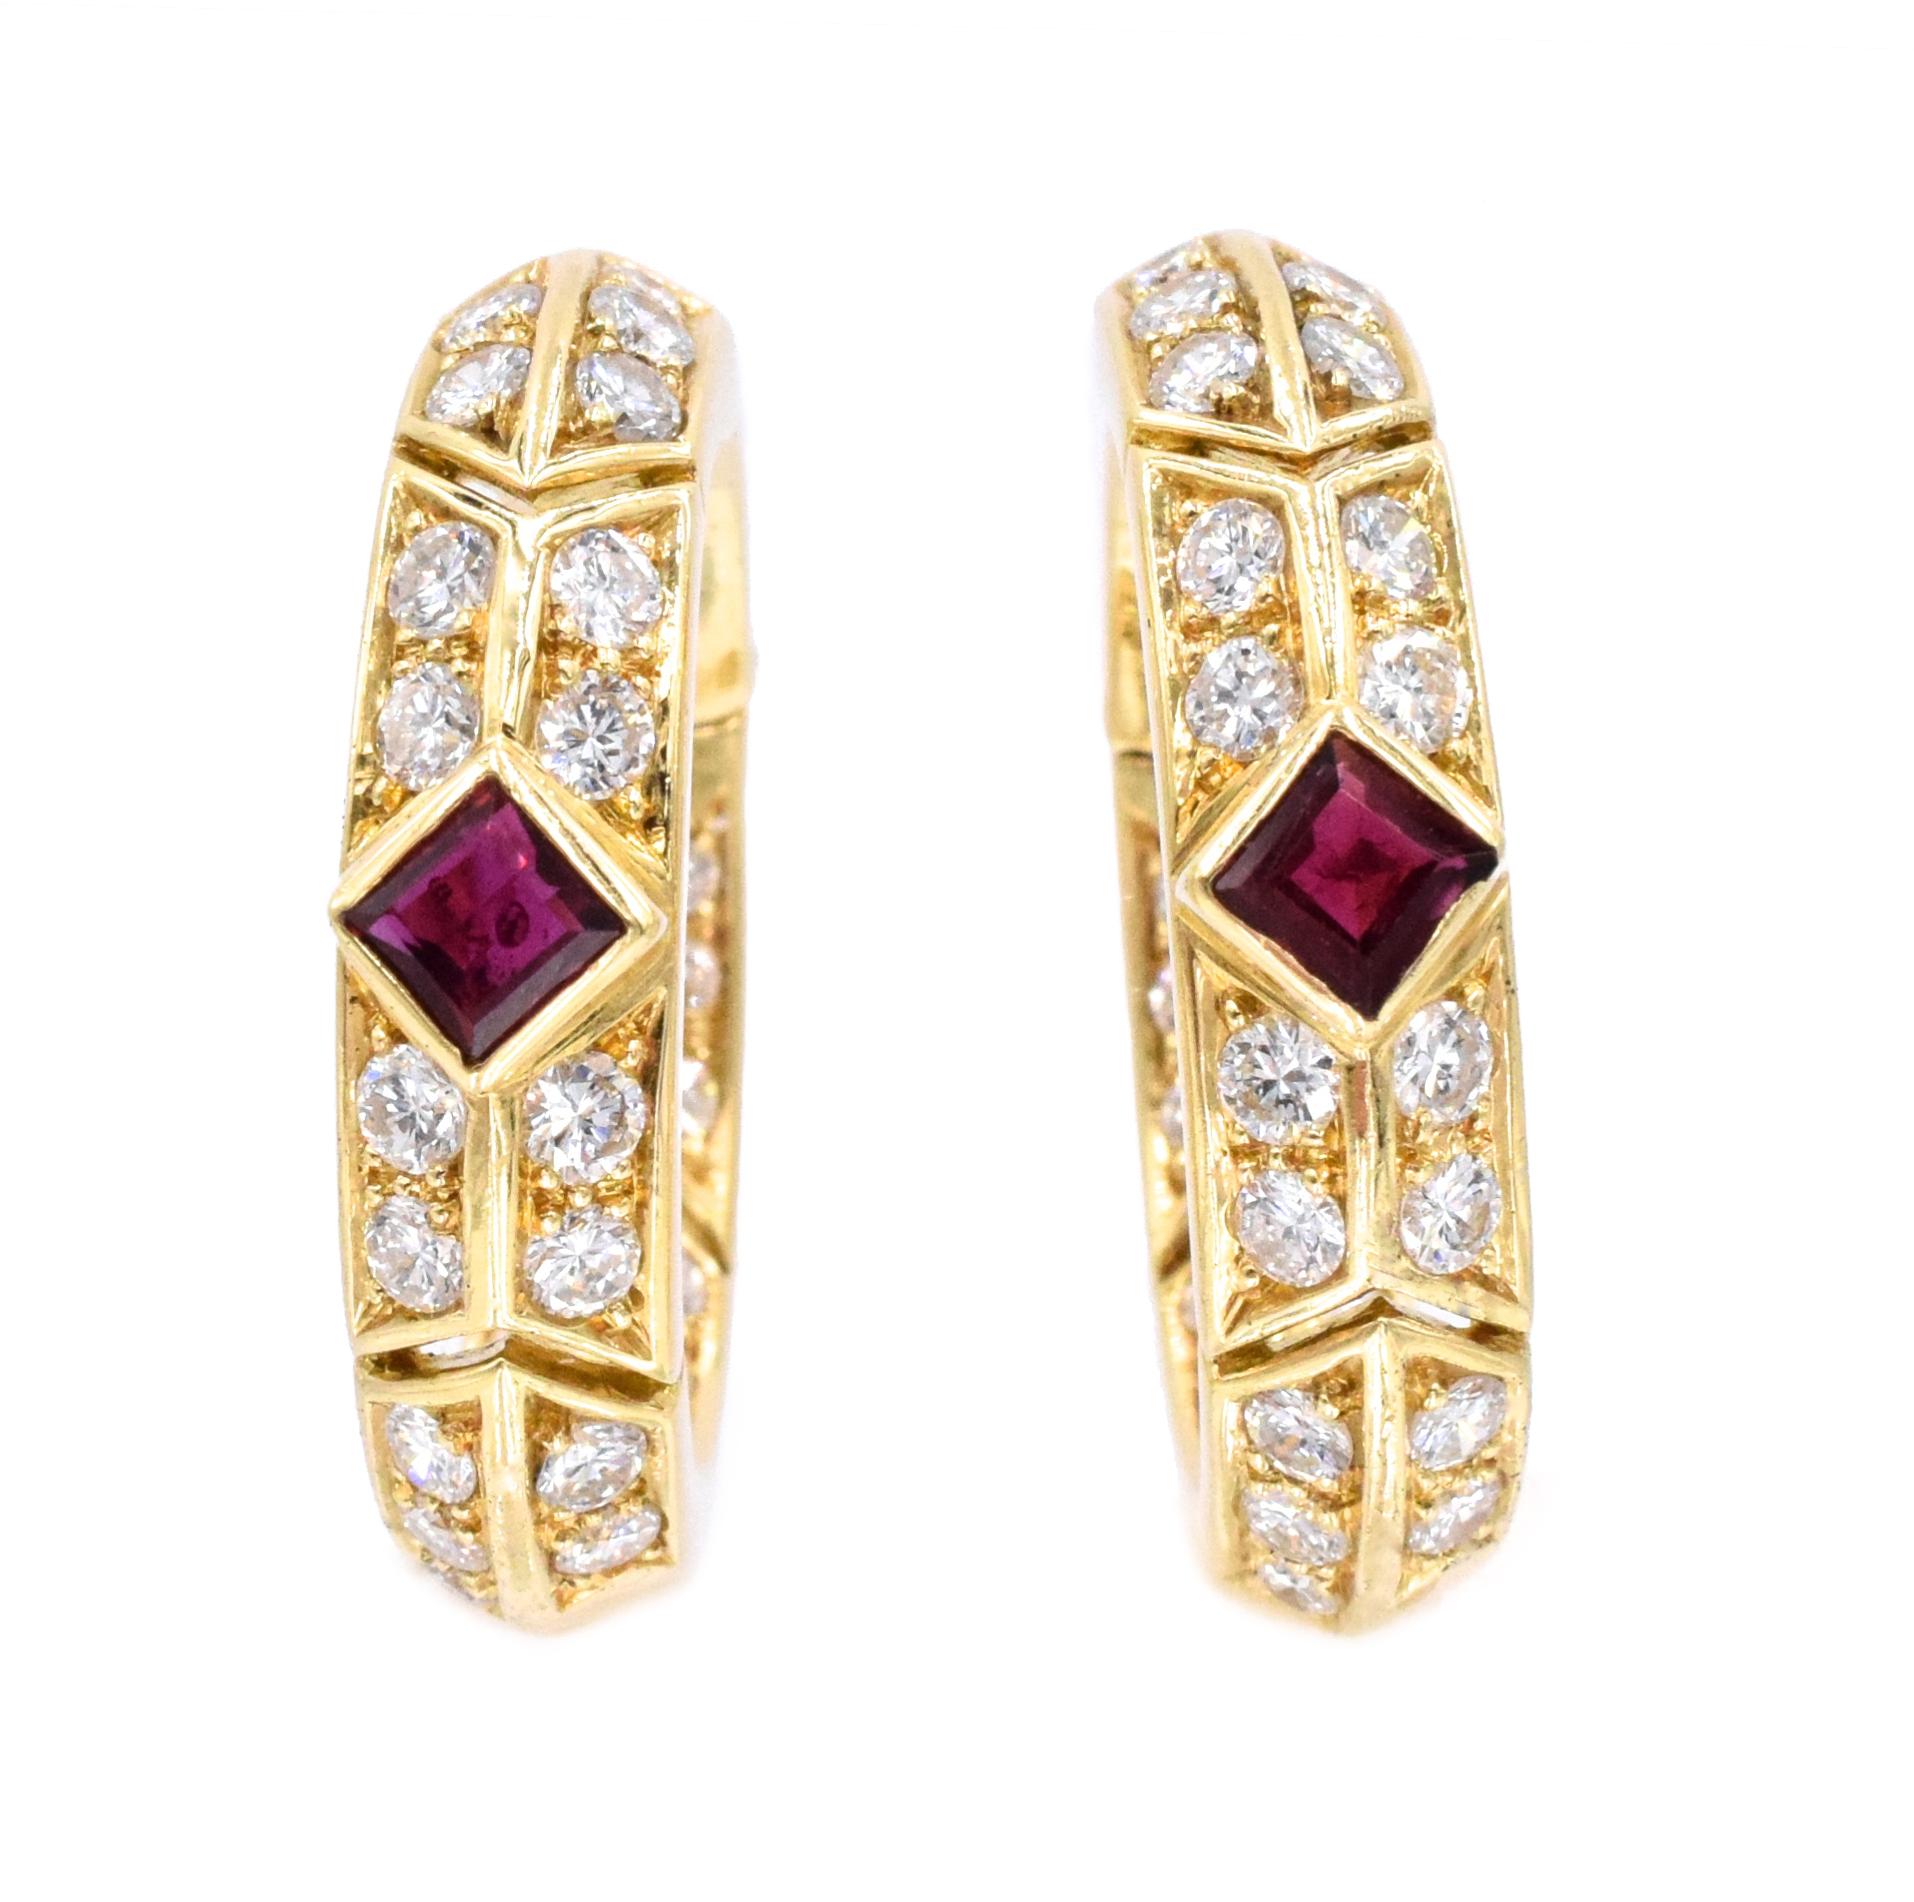 Van Cleef and Arpels Diamond, Ruby, and Gold Hoop Earrings
This pair of hoop earrings have 60 round brilliant cut diamonds with an approximate total weight of 2ct and two square rubies with an approximate total weight of 0.4ct, all set in 18kt